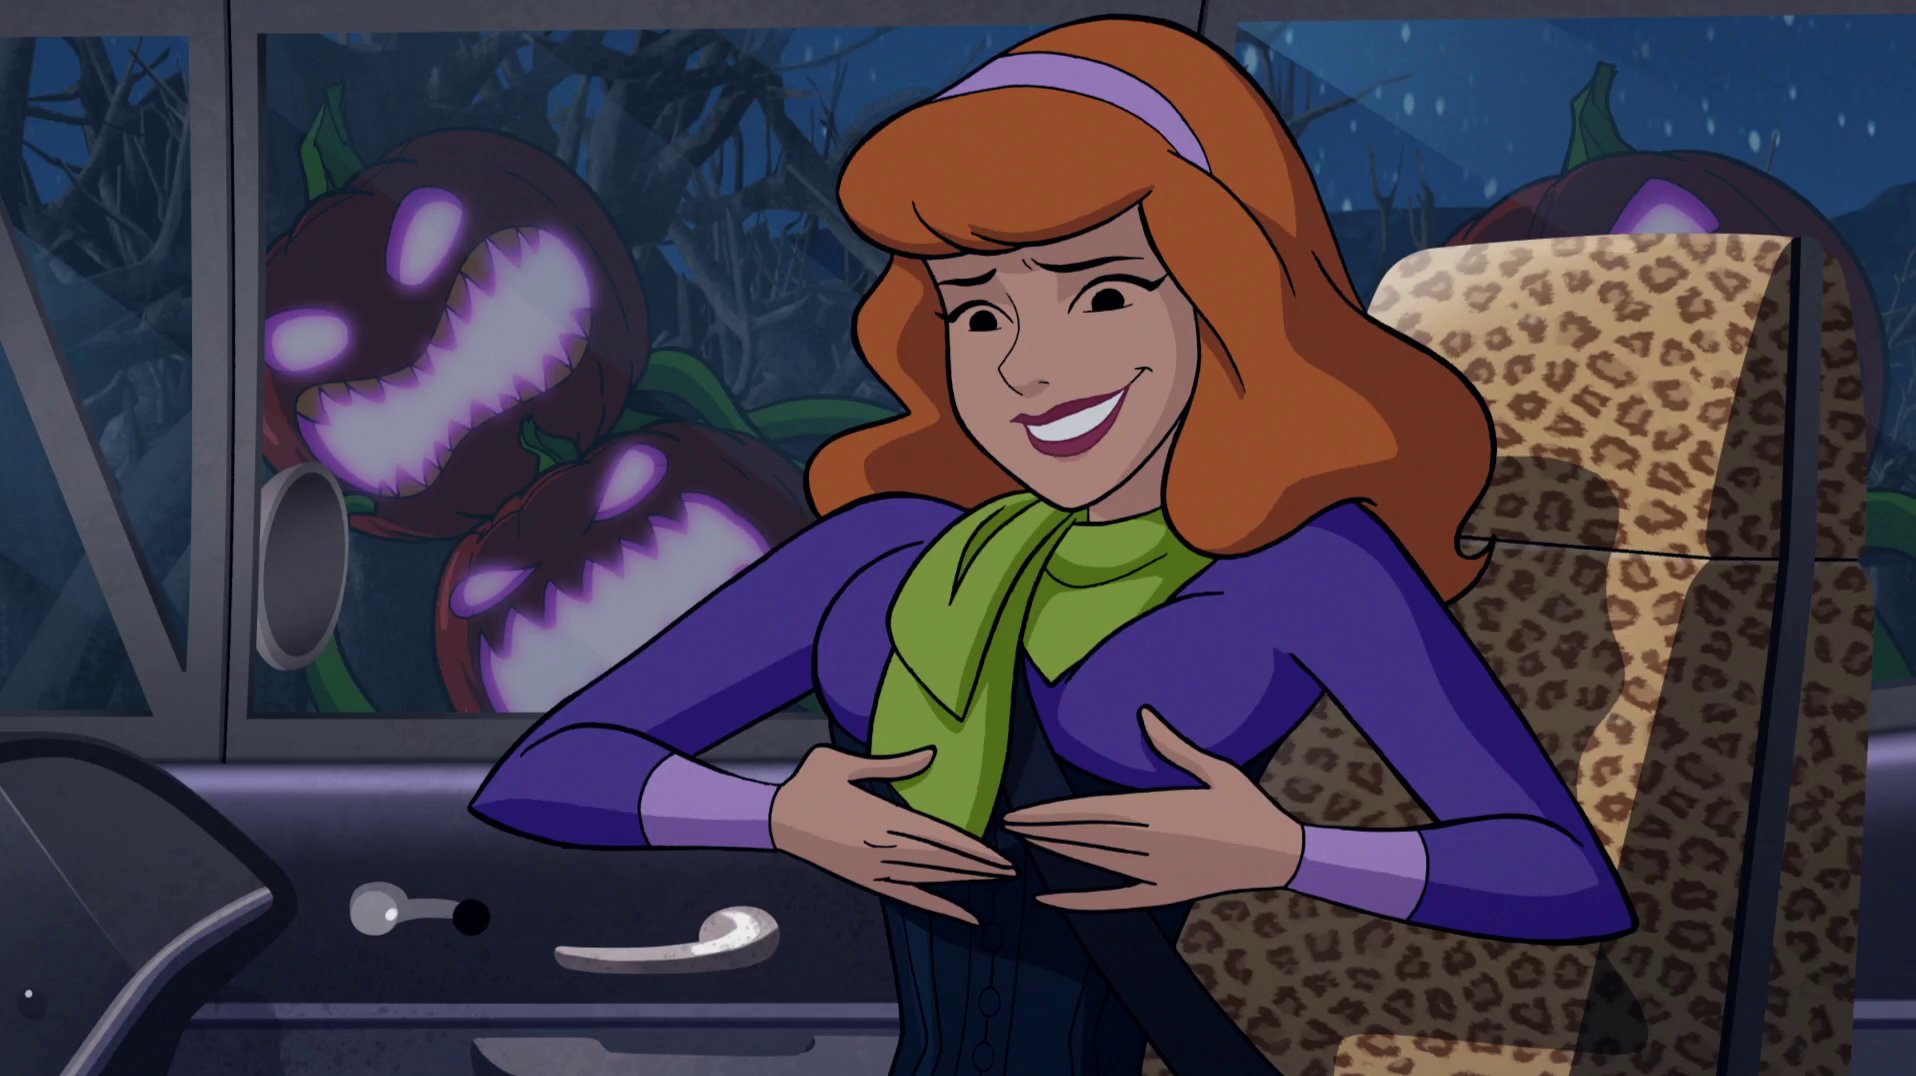 Daphne Blake from Scooby-Doo franchise.